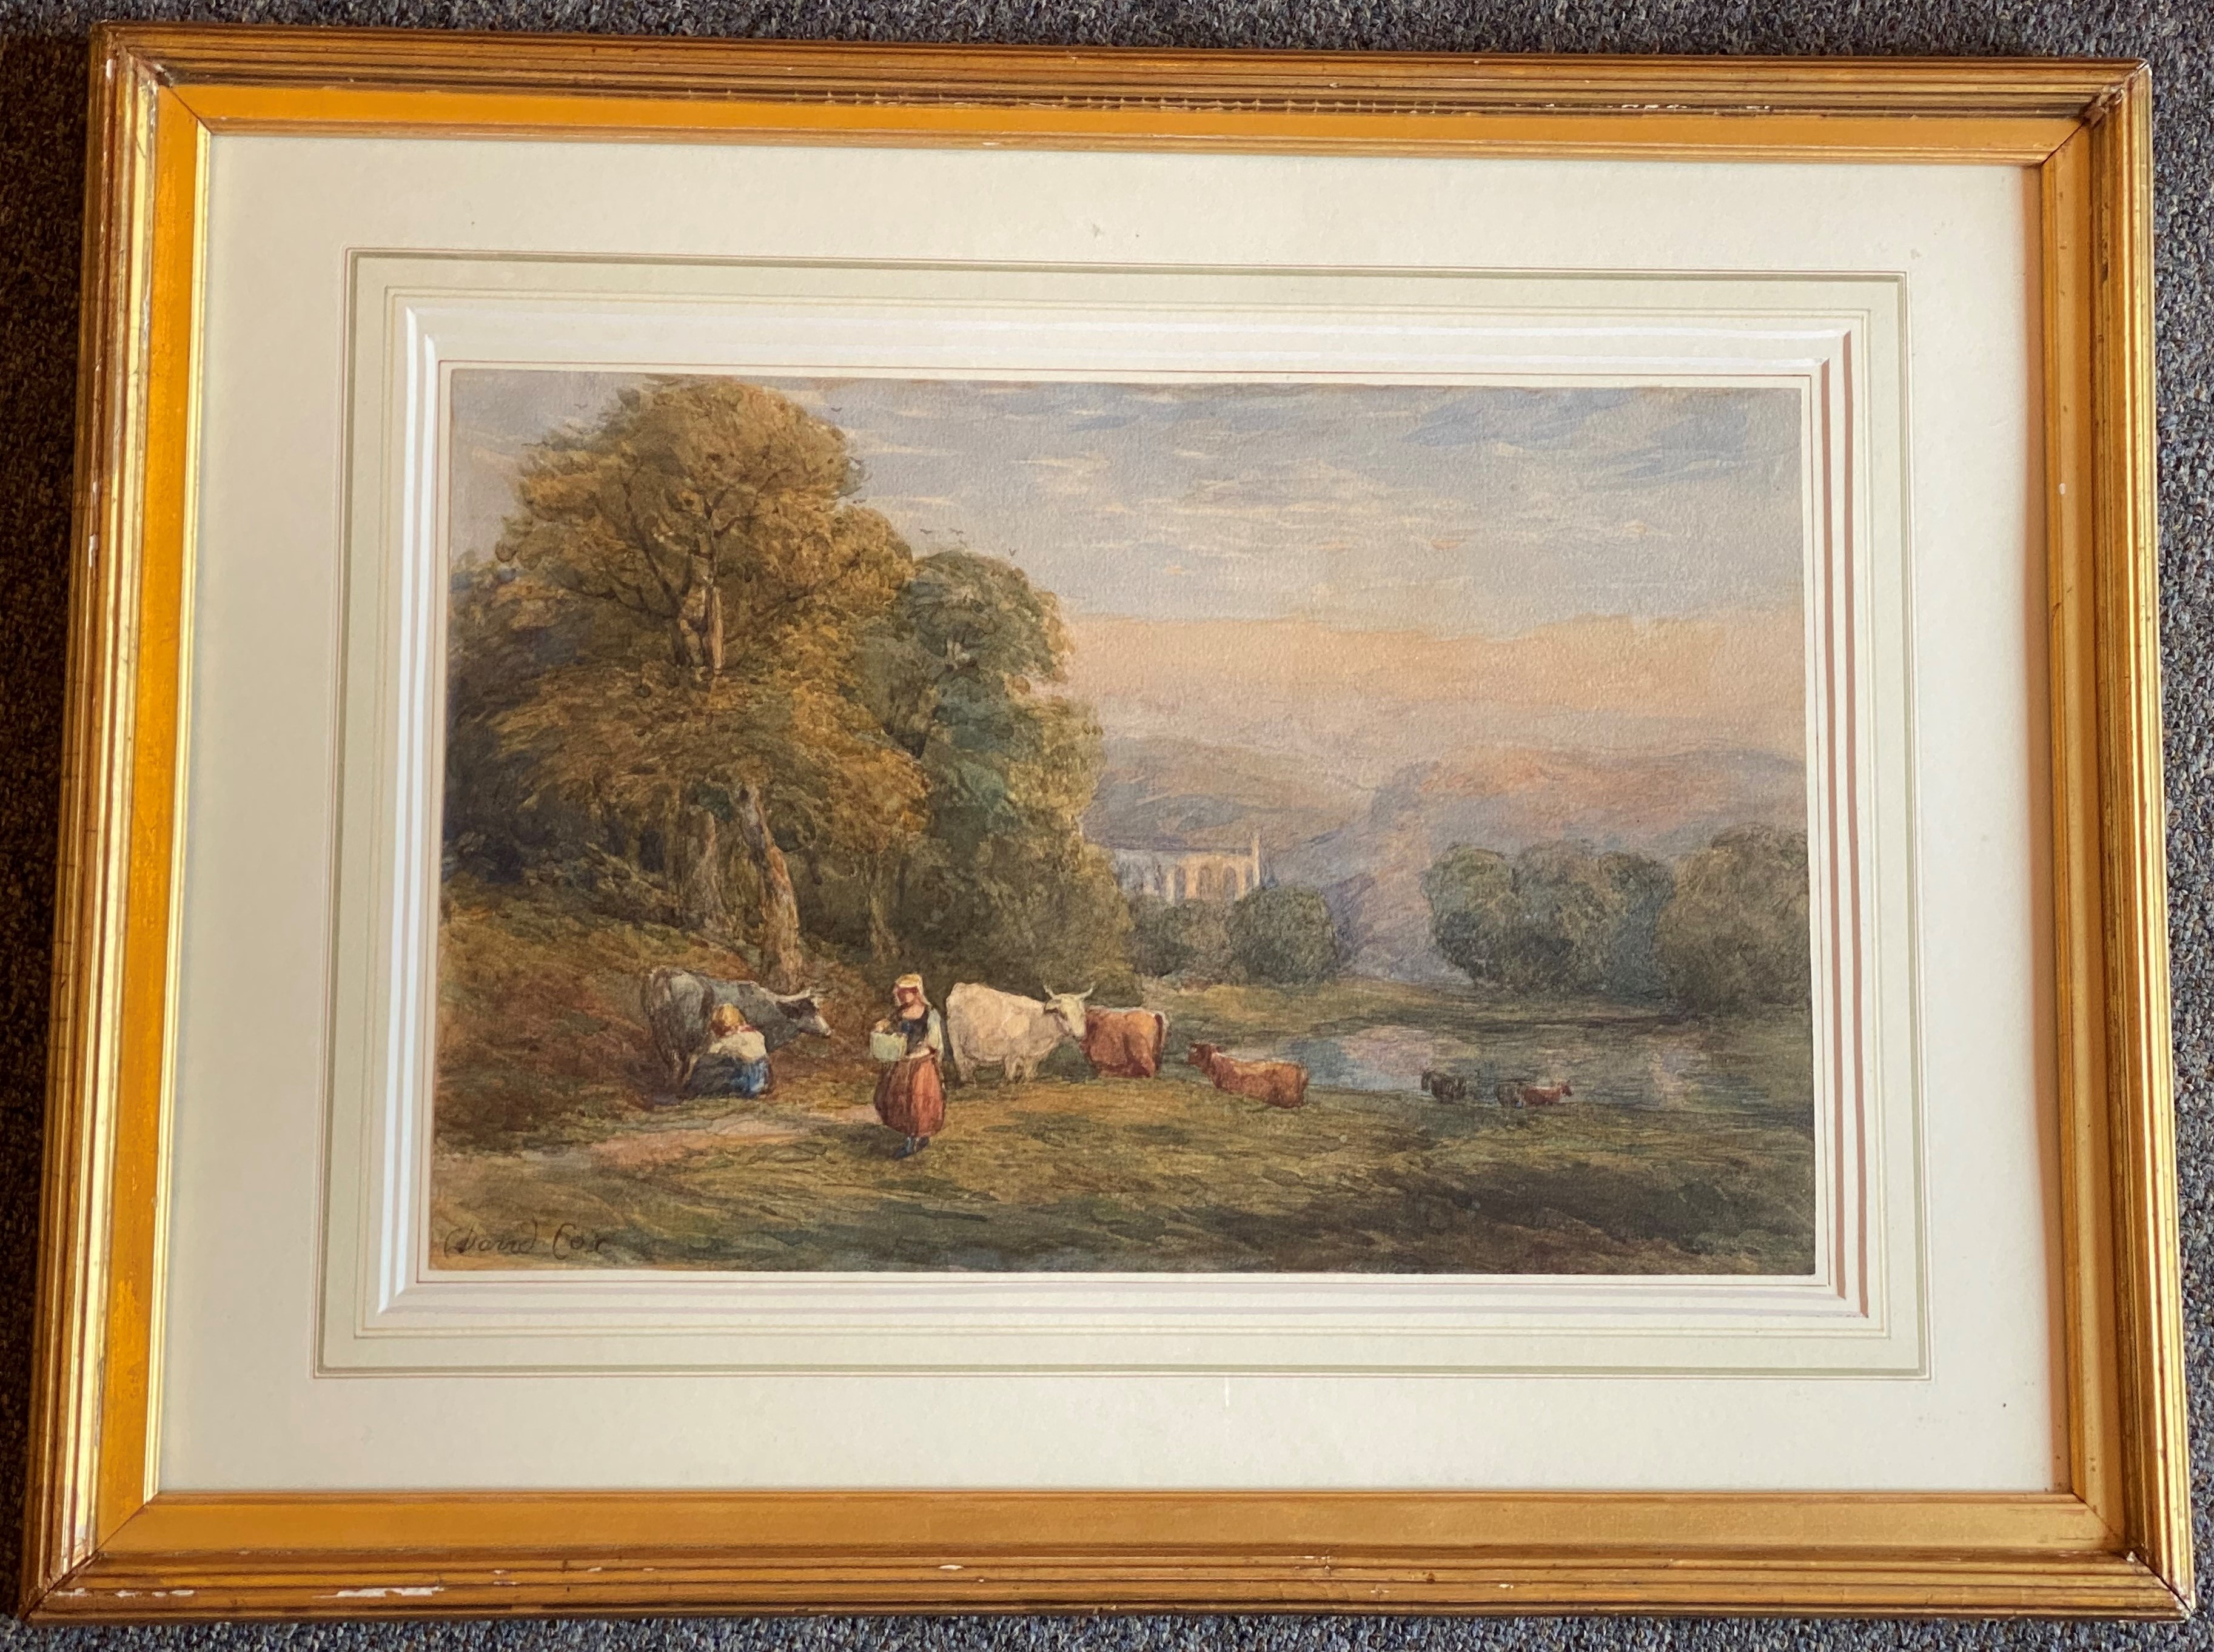 David Cox 1809-1885 British Signed watercolour The goat herders - Image 2 of 5